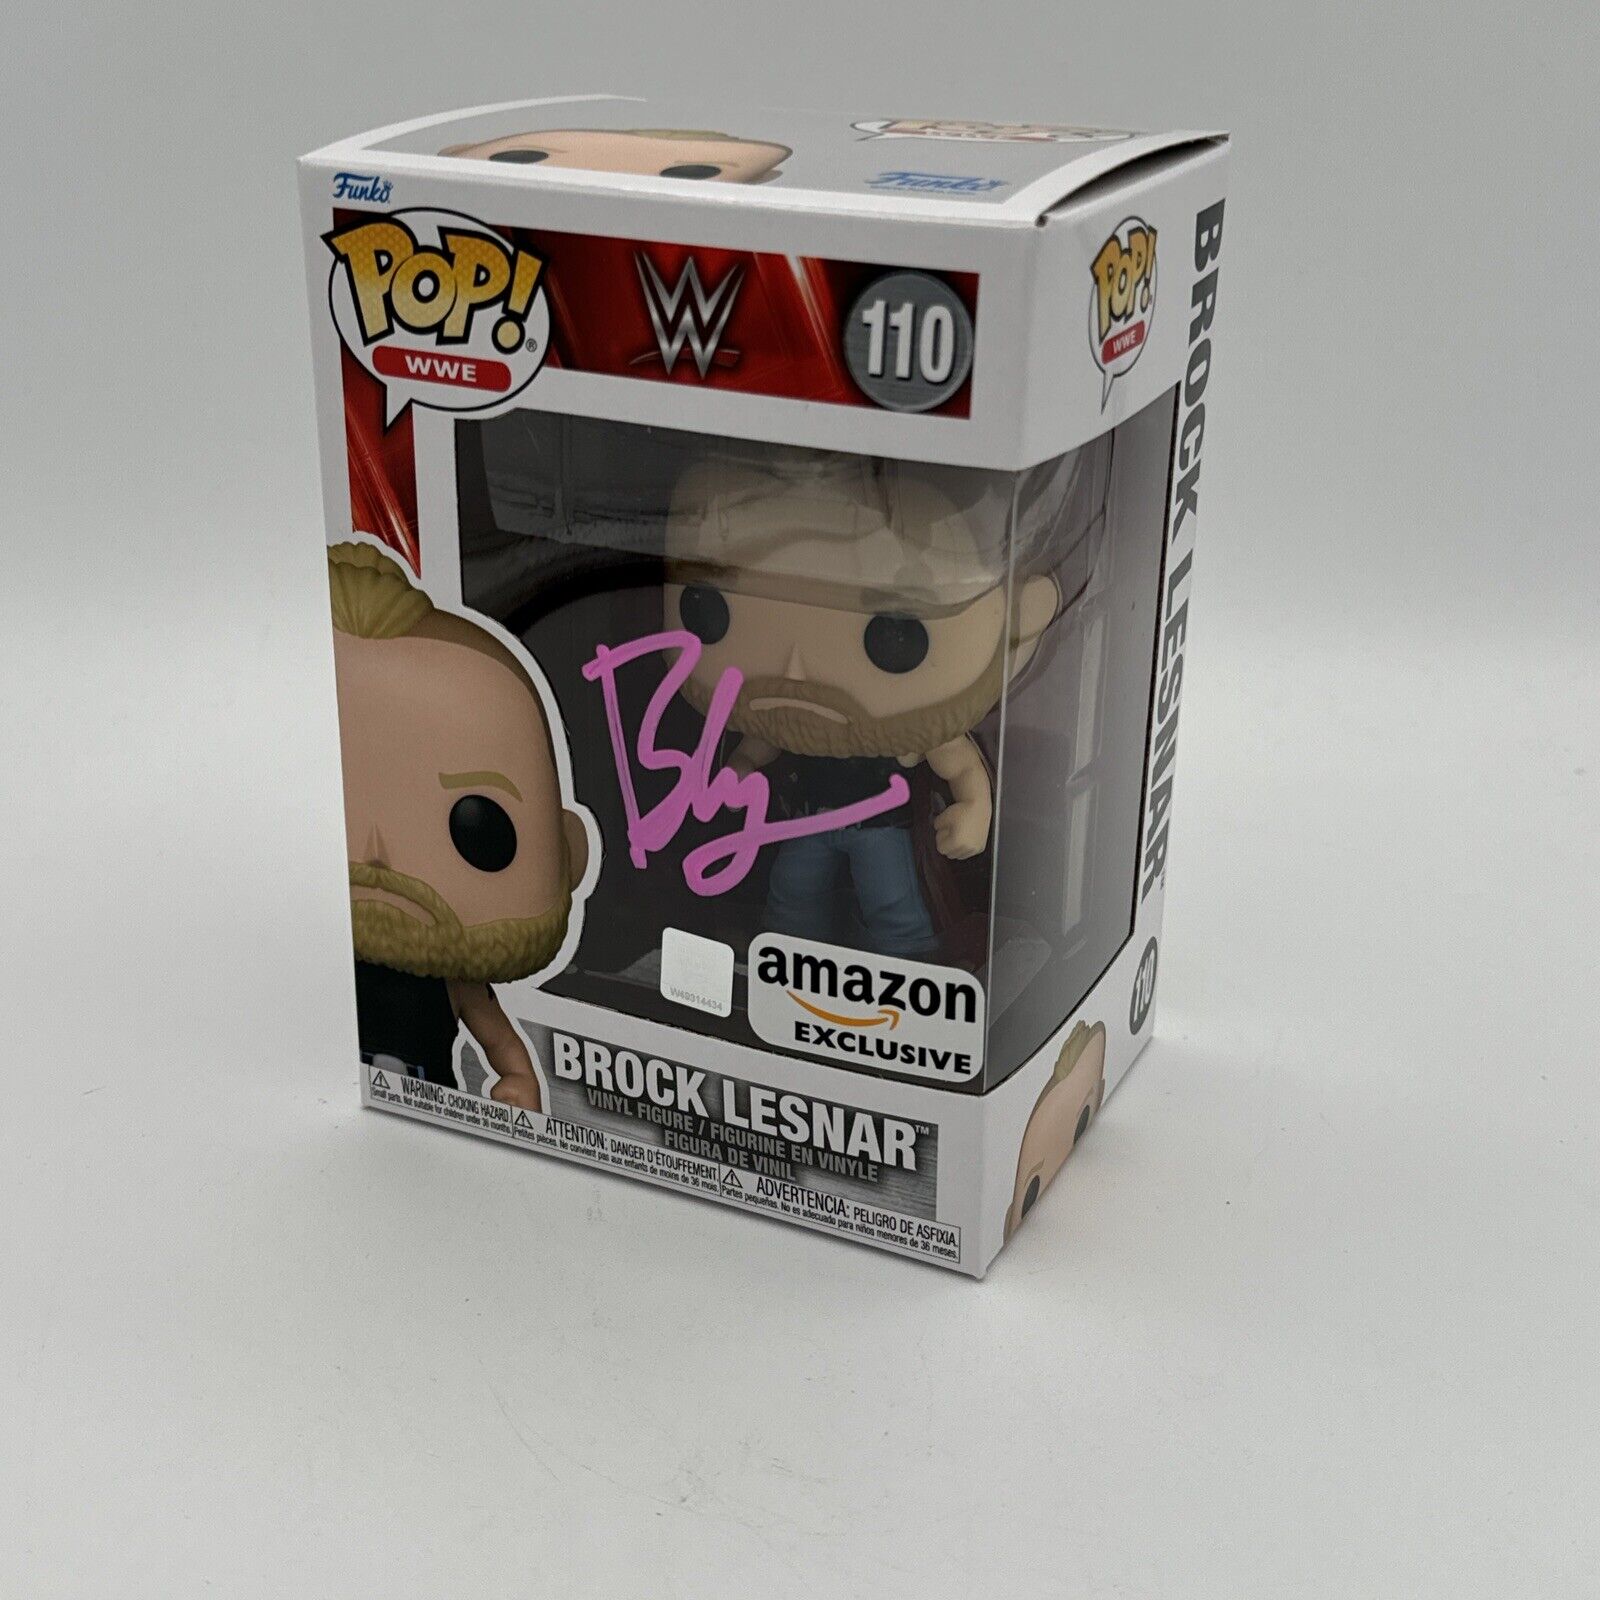 Brock Lesnar Auto Signed Funko Pop #110 WWE Wrestling Superstar Collectible